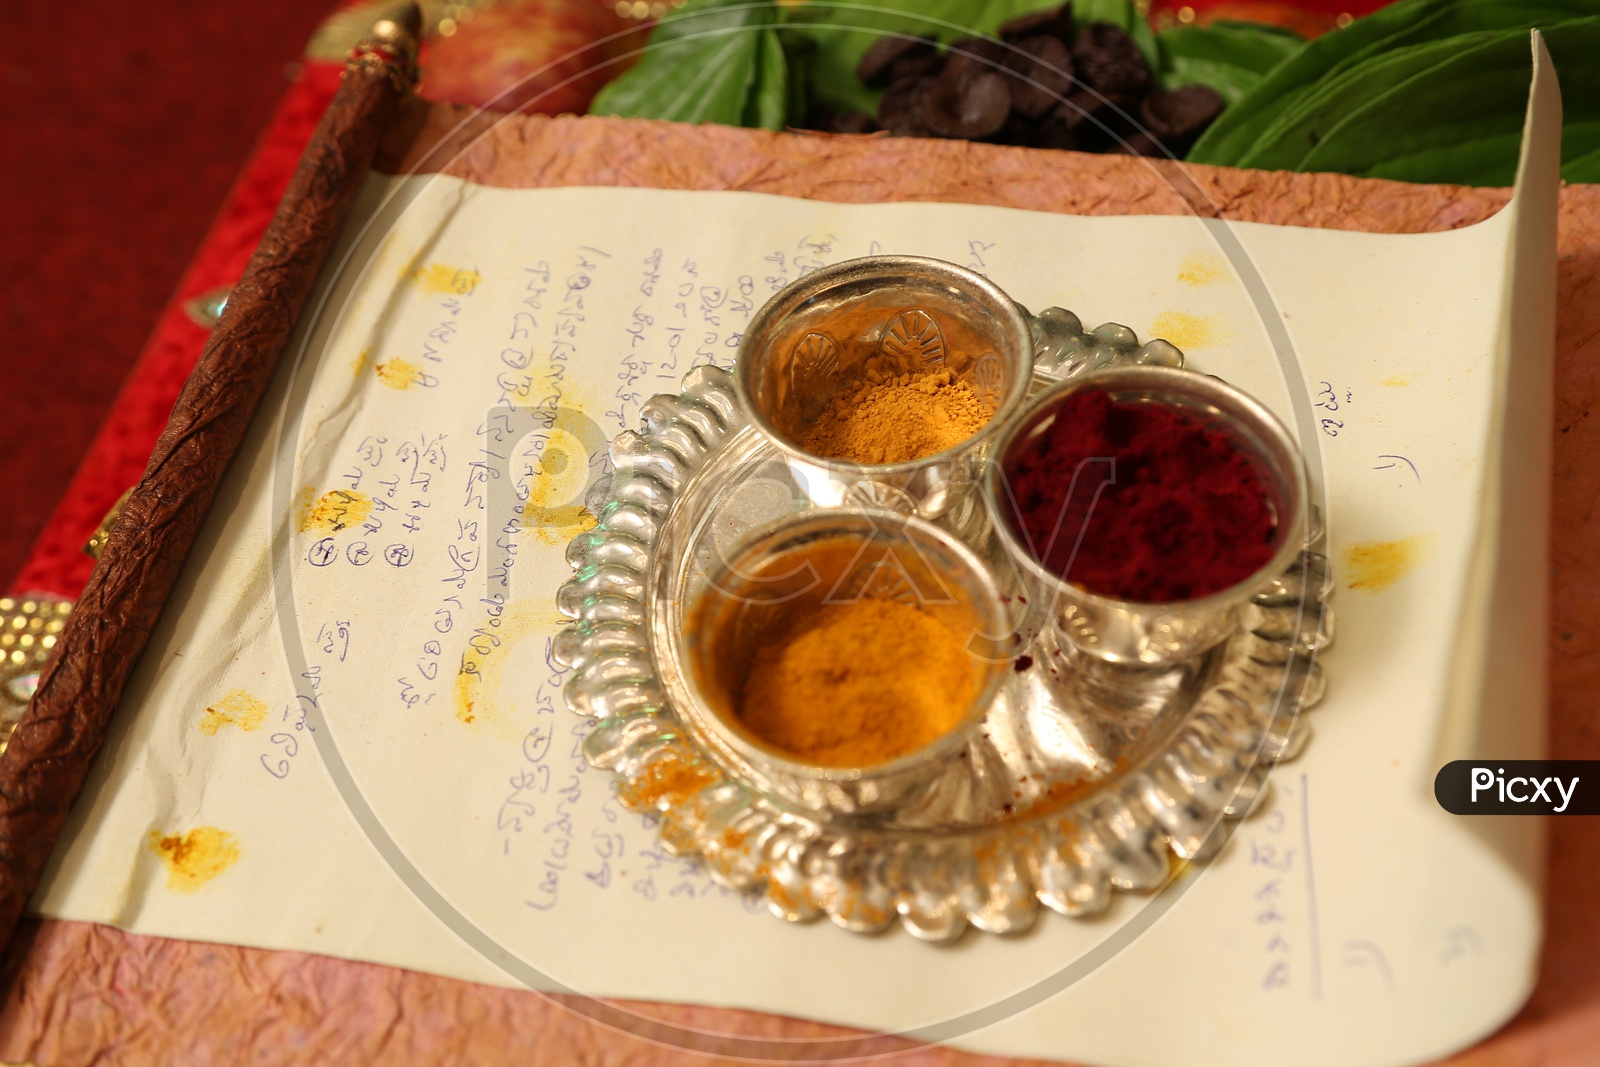 Siindhur and Turmeric in a silver plate